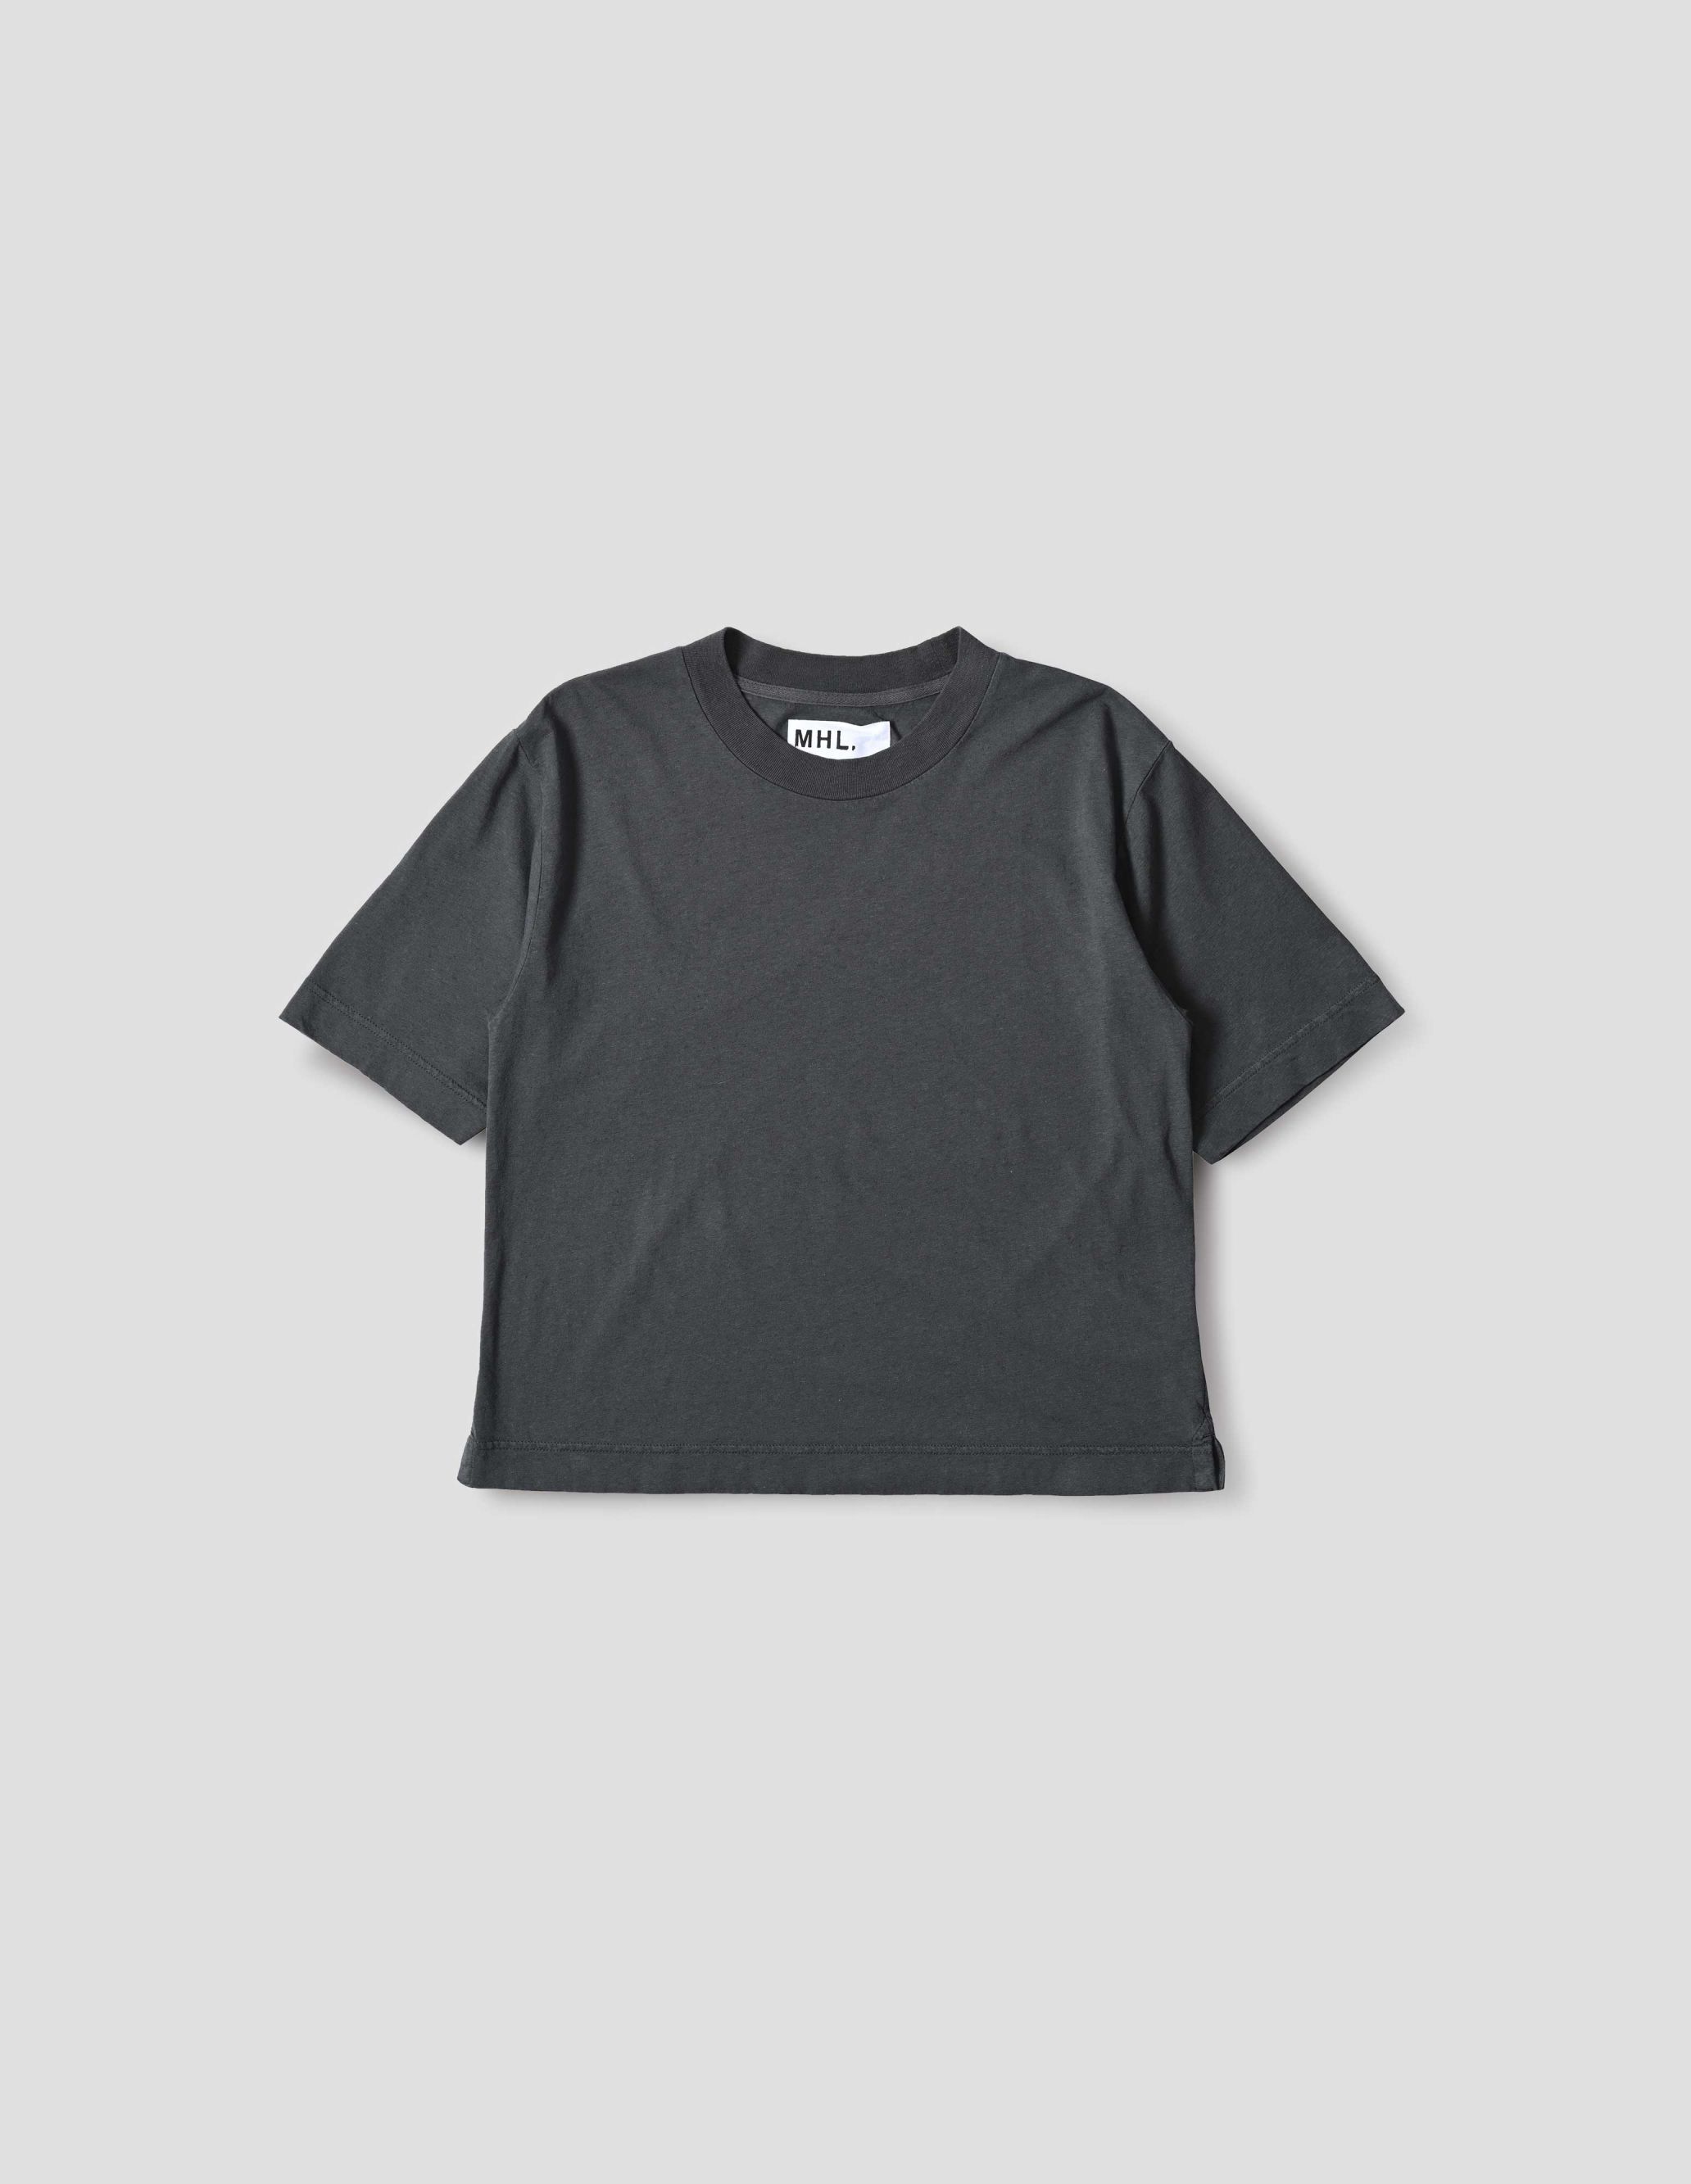 MARGARET HOWELL - Charcoal cotton linen T shirt | MHL. by Margaret